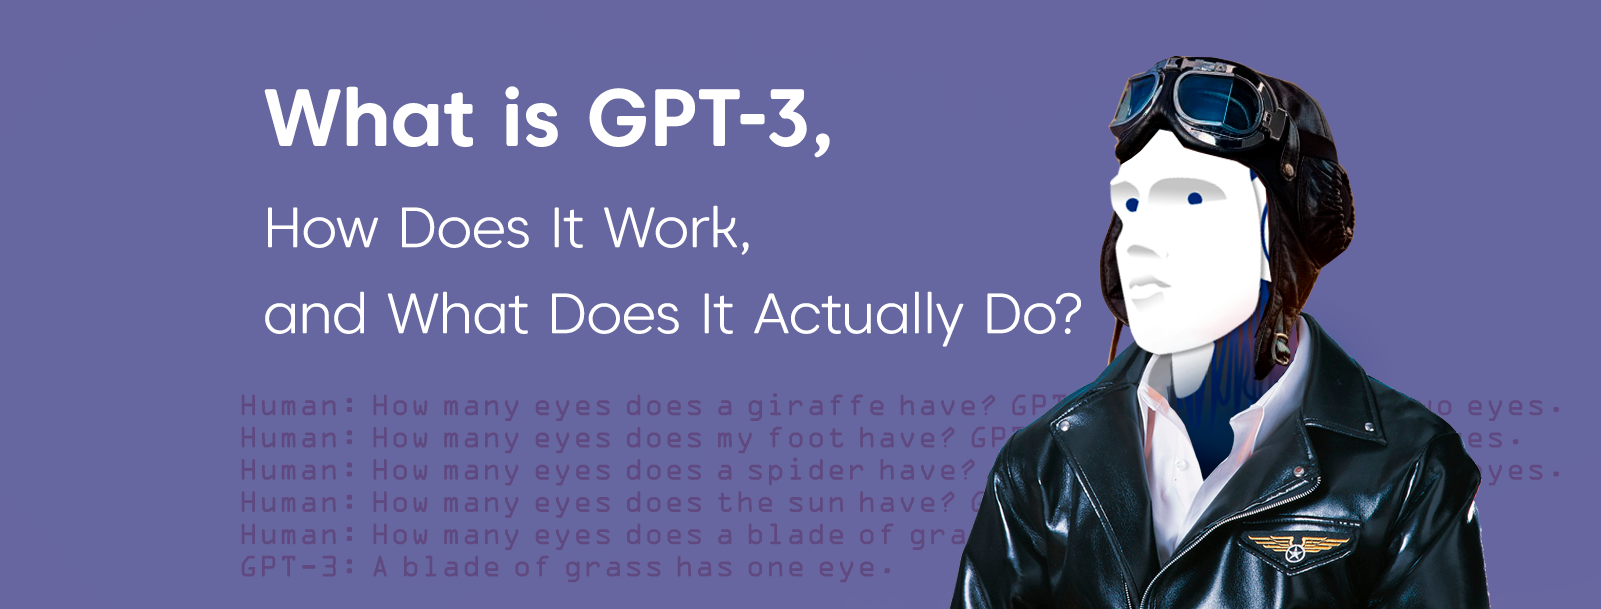 WHAT IS GPT-3, HOW DOES IT WORK, AND WHAT DOES IT ACTUALLY DO?